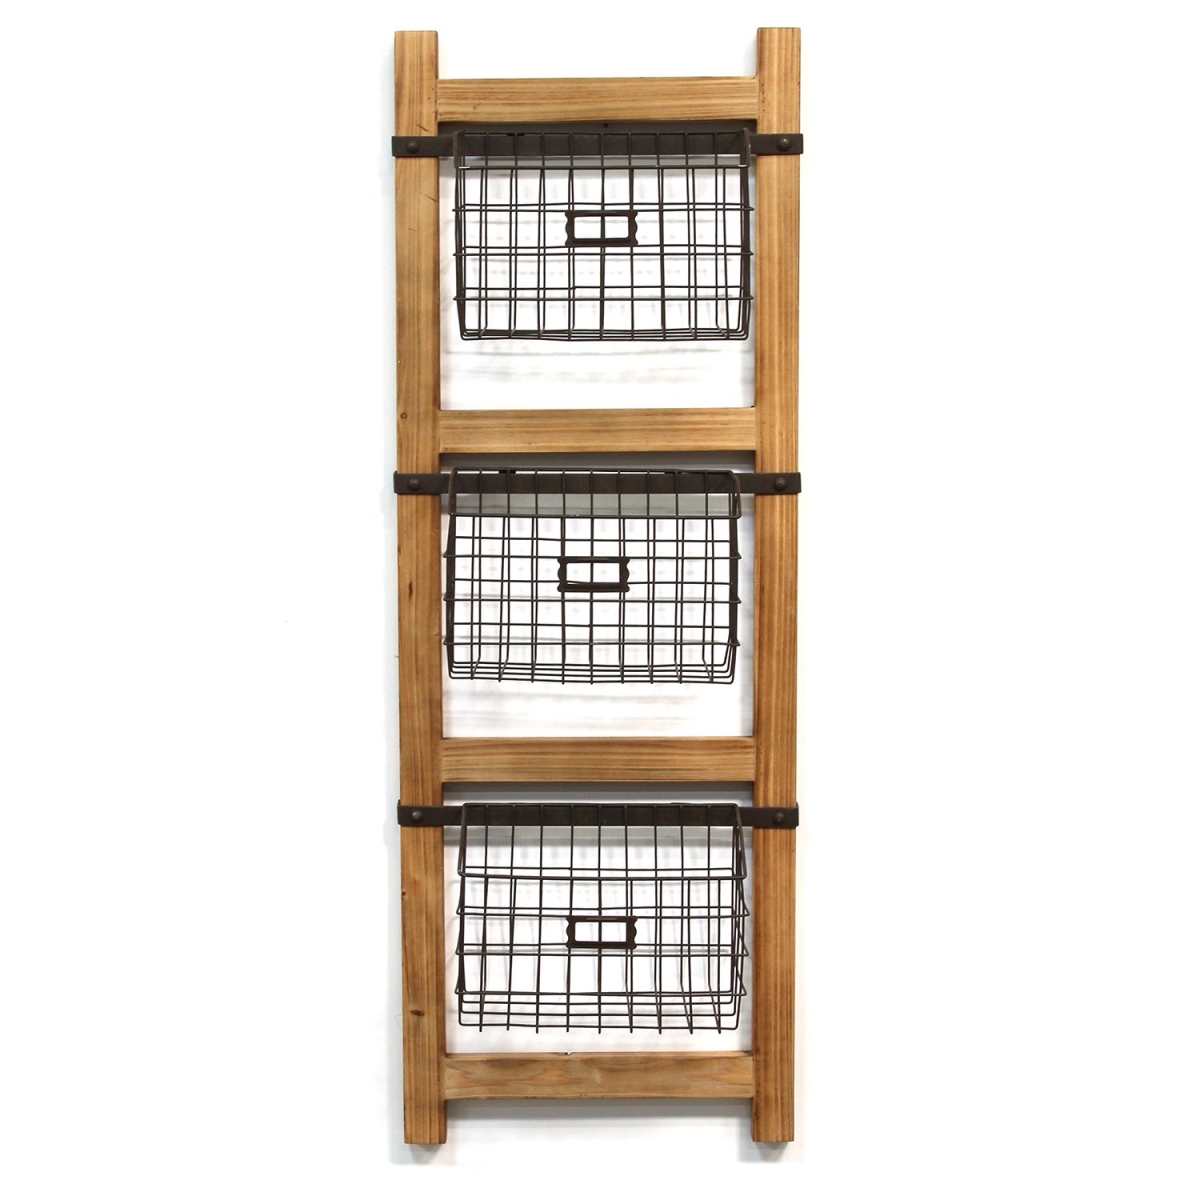 Home Roots 321322 Decorative Ladder With Baskets Wall Decor, Natural Wood & Black